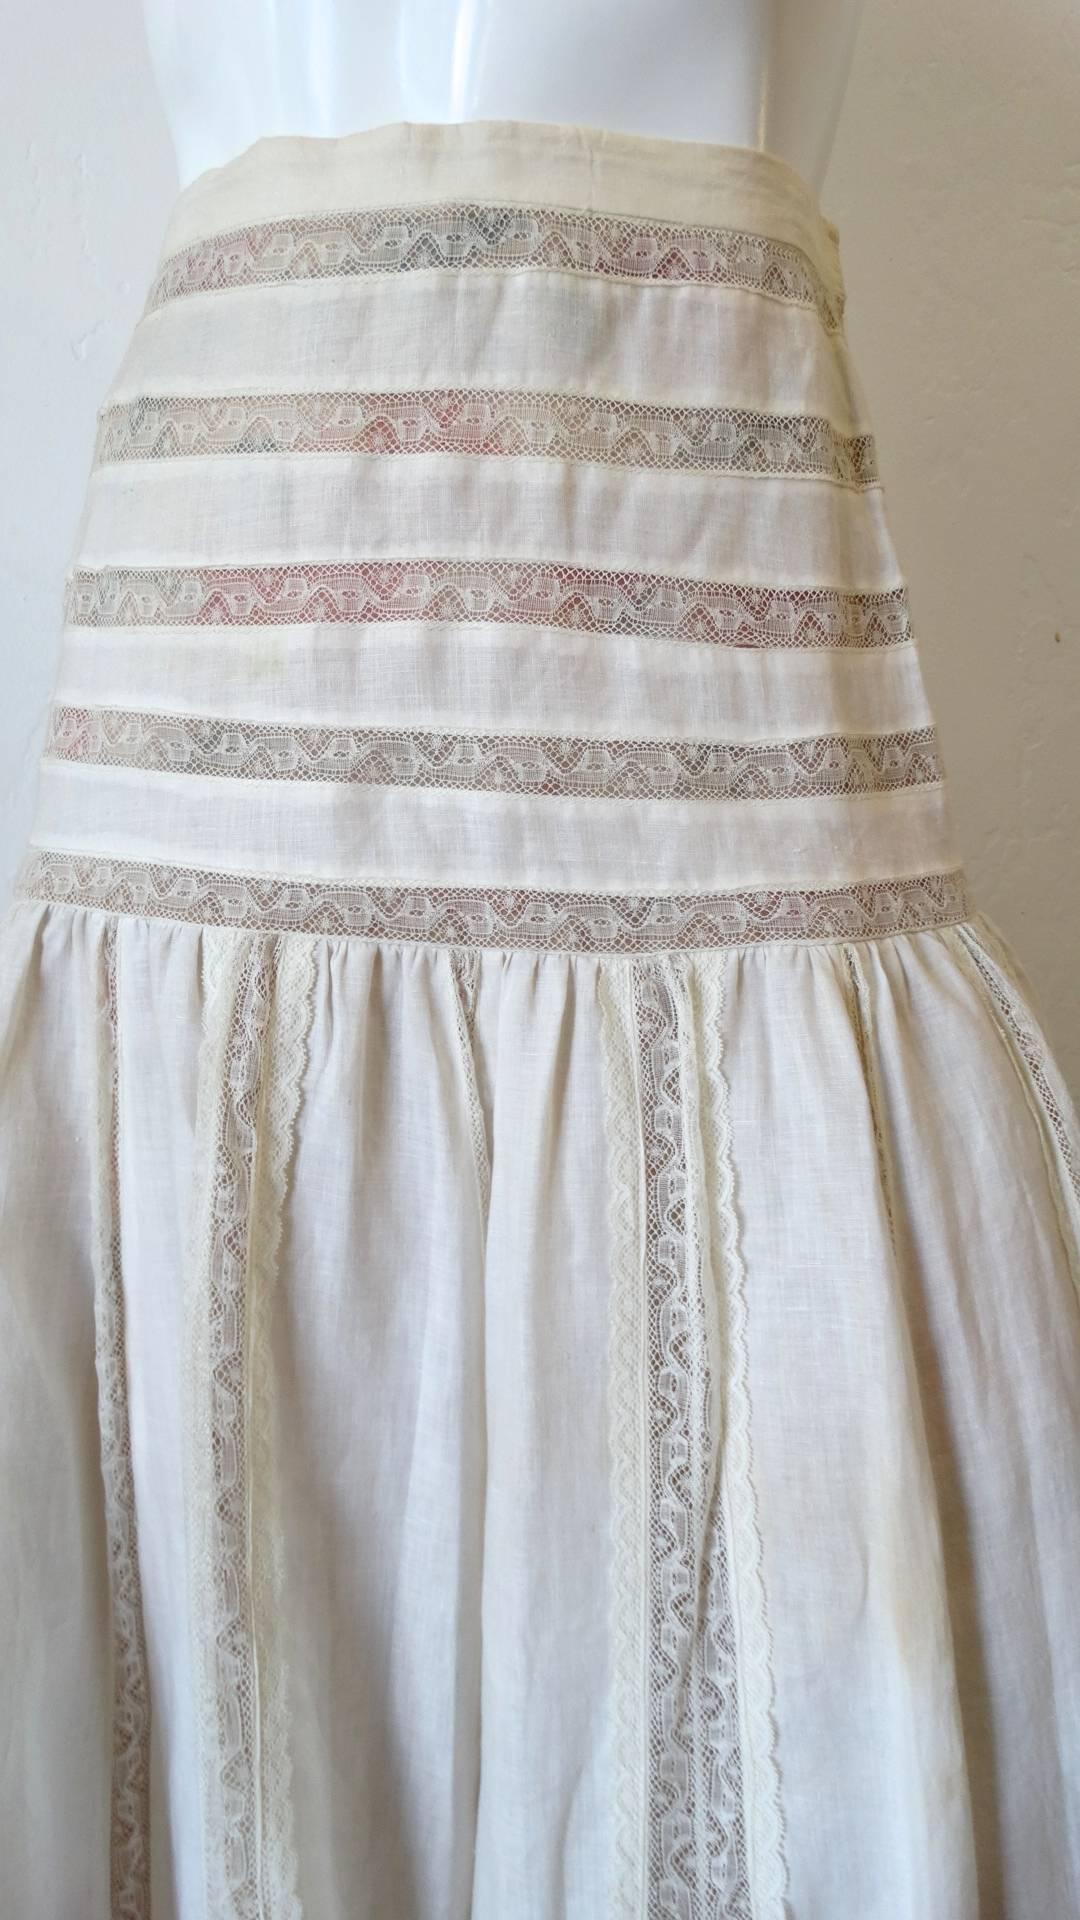 Your perfect summer skirt has arrived with our amazing 1980s white lace maxi skirt from designer Yoly Munoz. Made of a white cotton and sheer lace fabric, striped around the waist and hips. High rise fit and maxi style length.  This skirt is marked